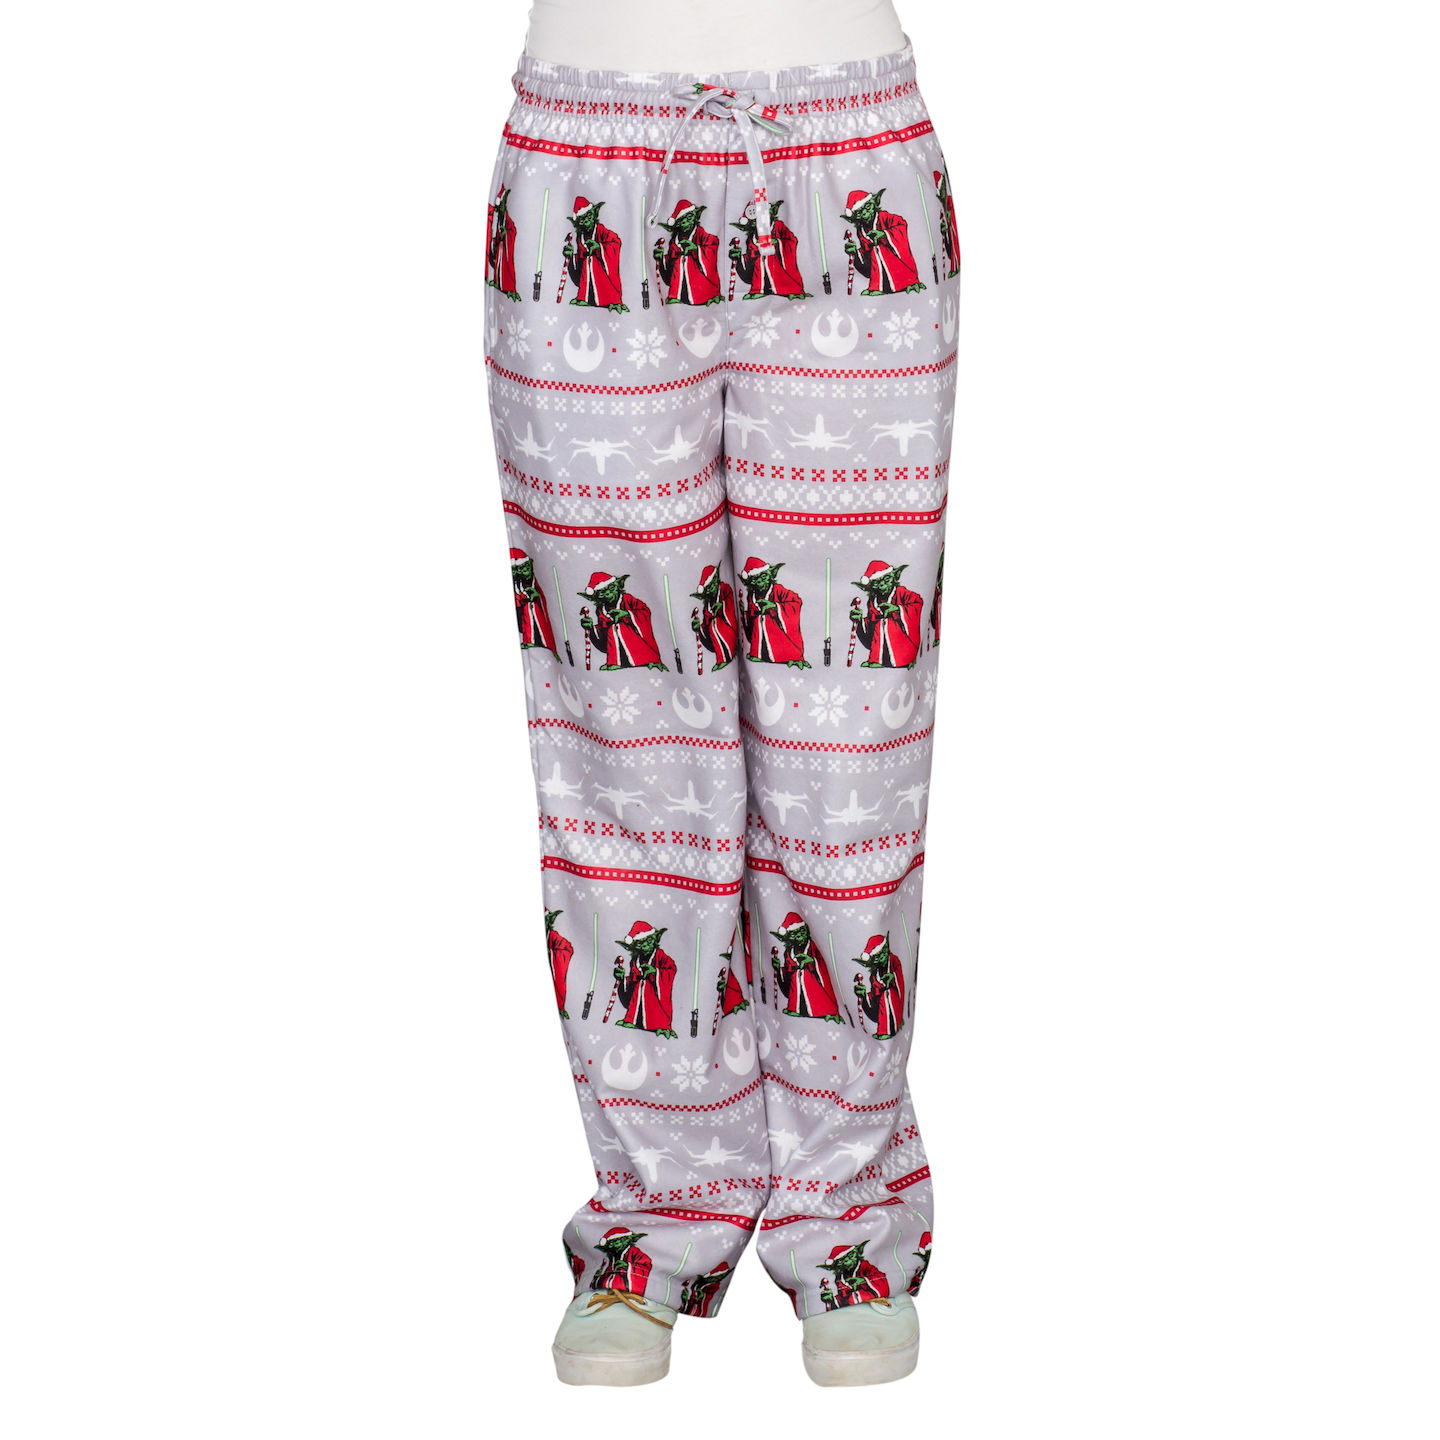 Star Wars Yoda Logo Christmas Lounge Pants,Specials : uglyschristmassweater.com